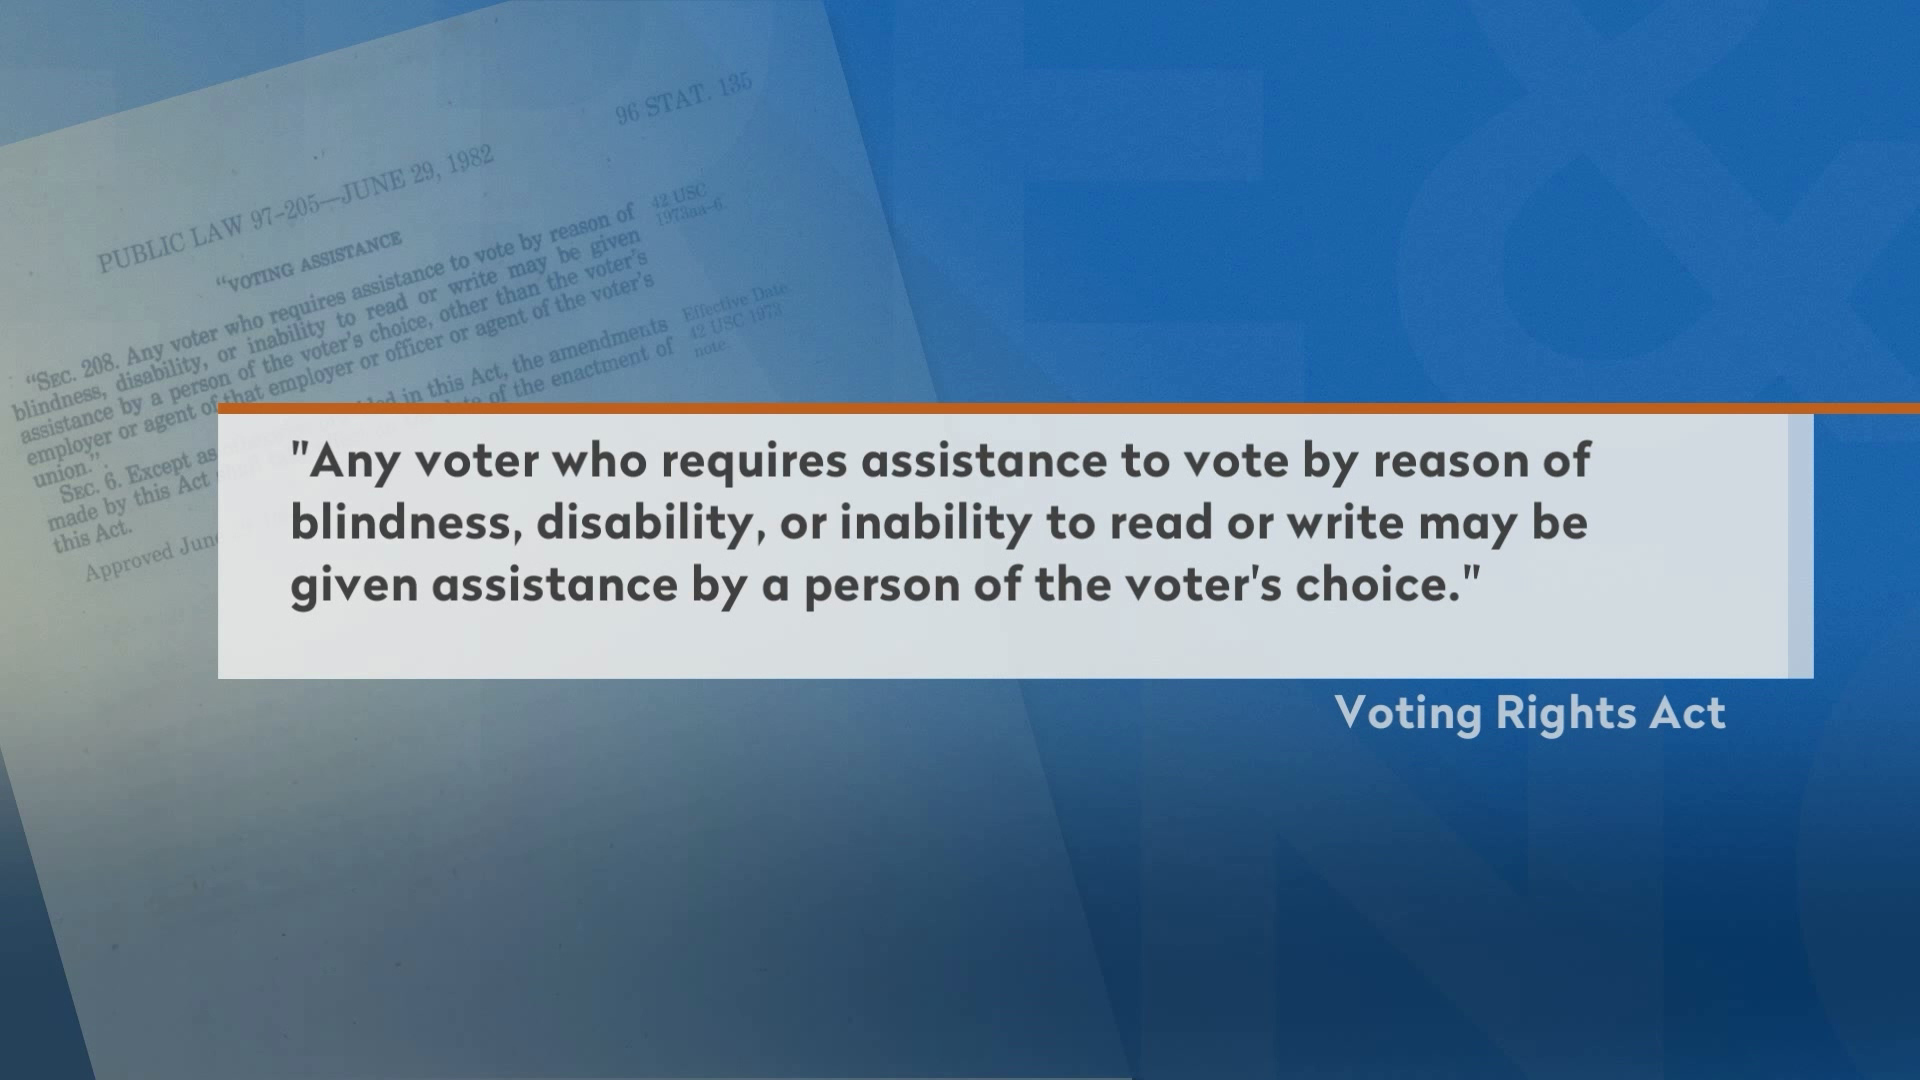 A text graphic reads "Any voter who requires assistance to vote by reason of blindness, disability, or inability to read or write may be given assistance by a person of the voter's choice" and is attributed to the Voting Rights Act.